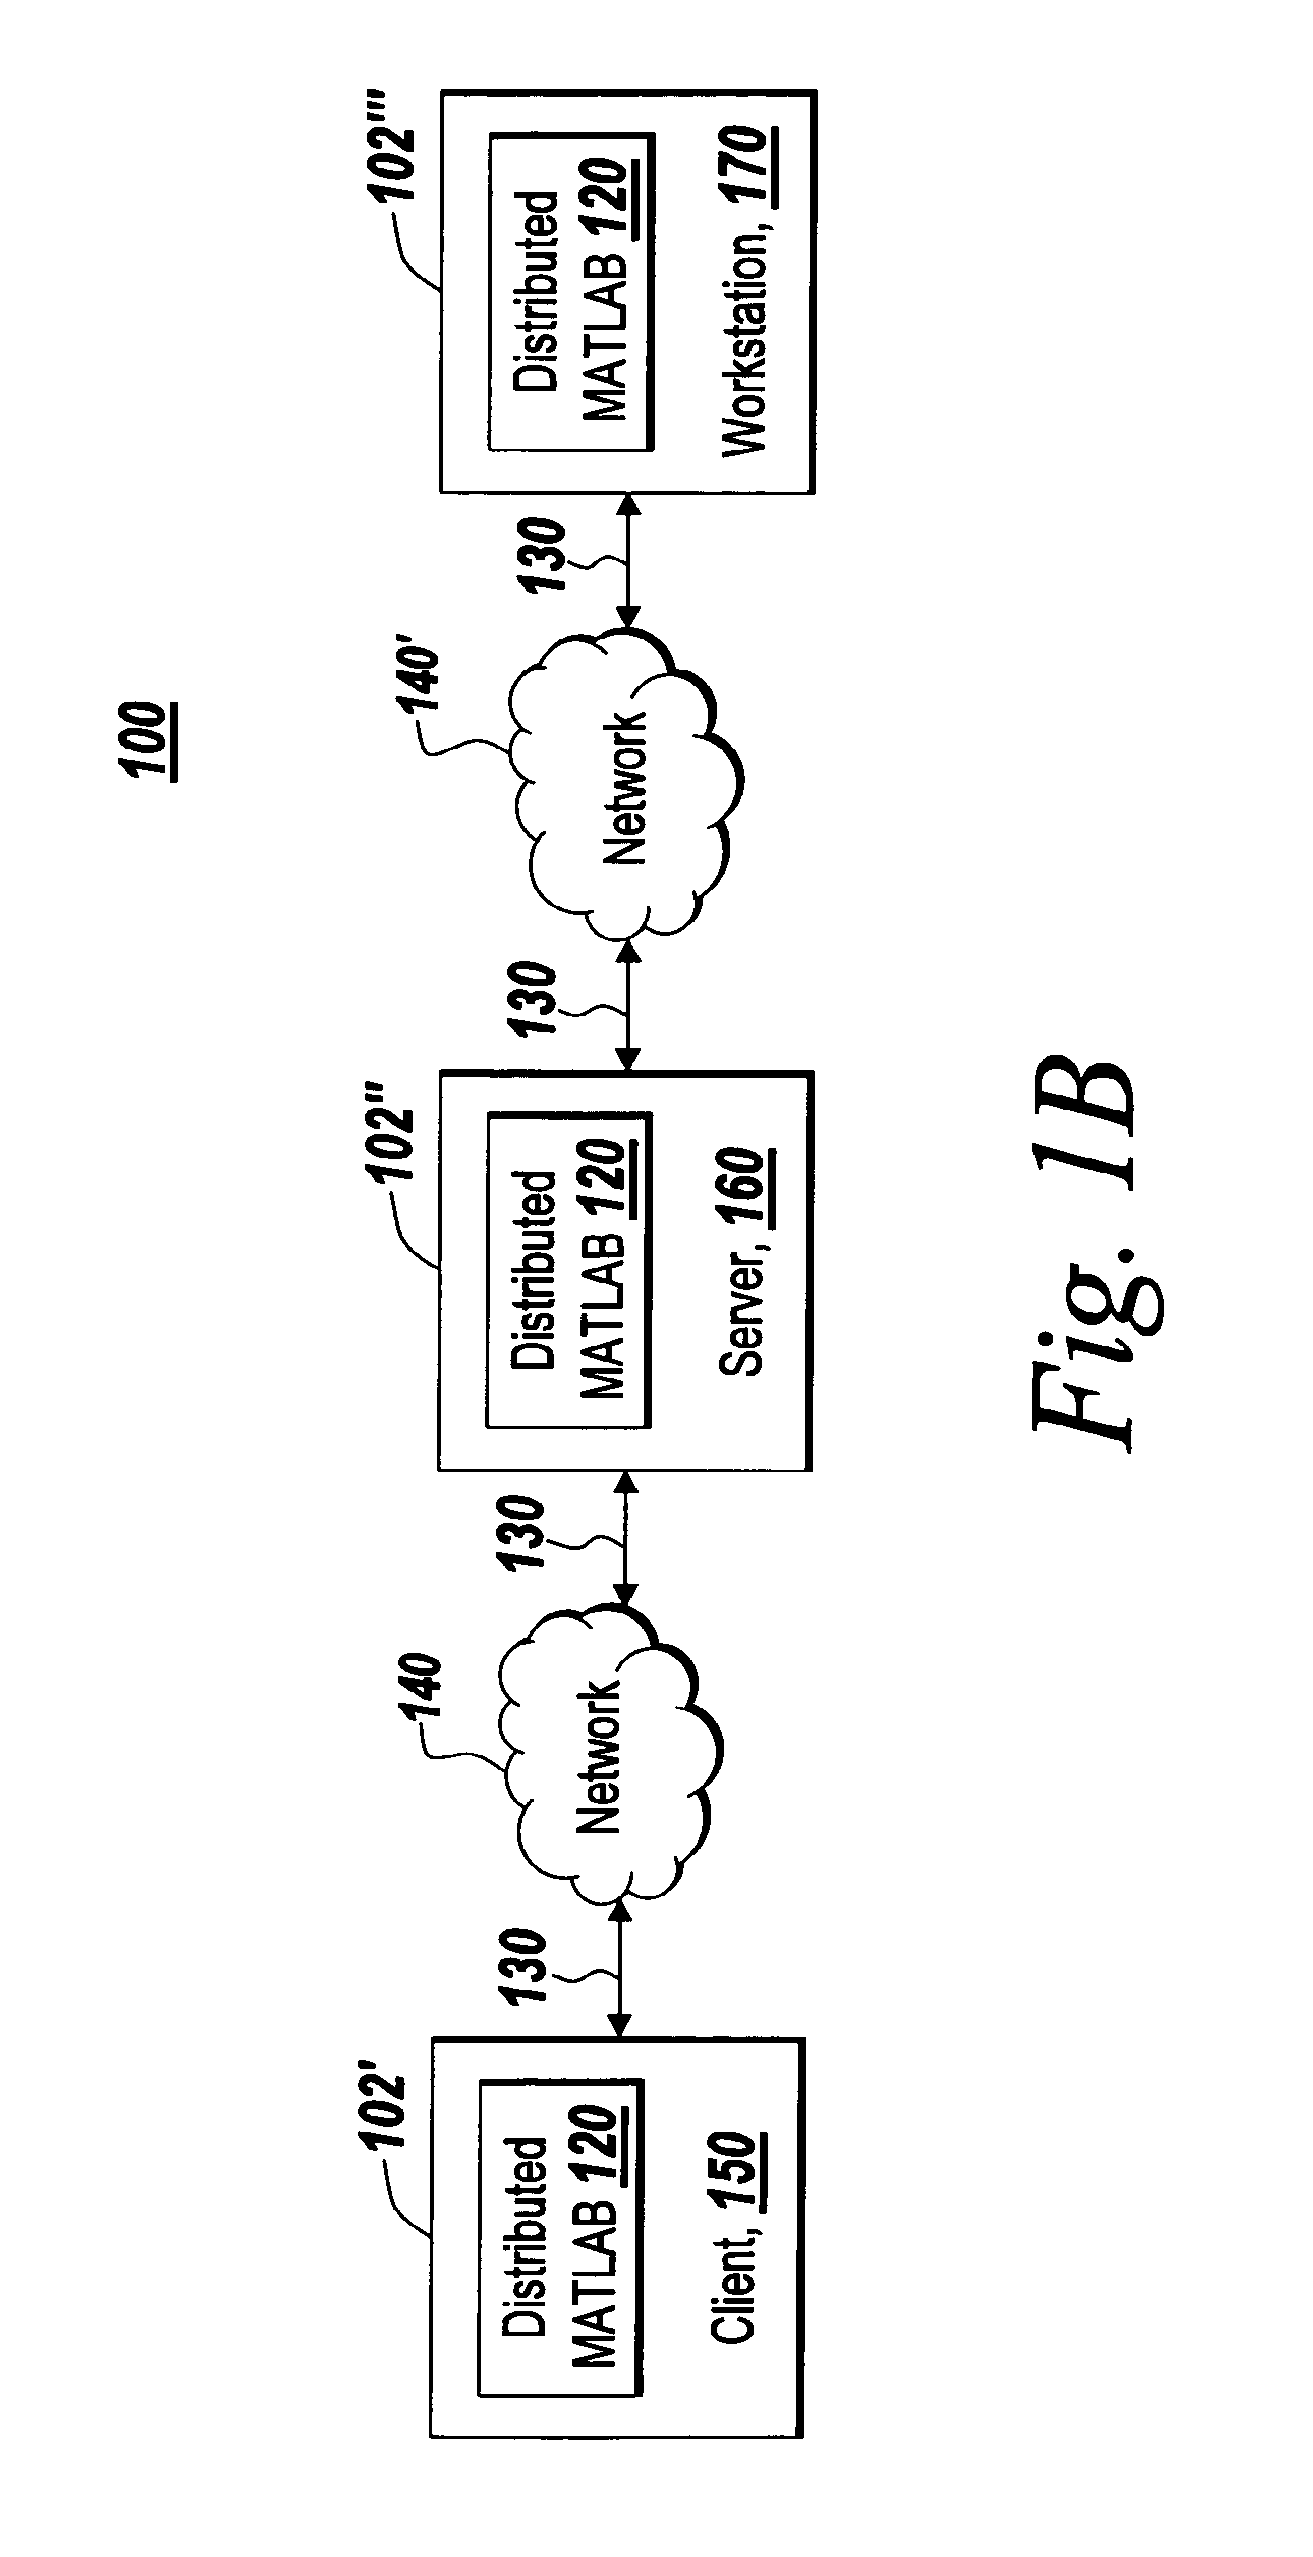 Methods and system for distributing technical computing tasks to technical computing workers